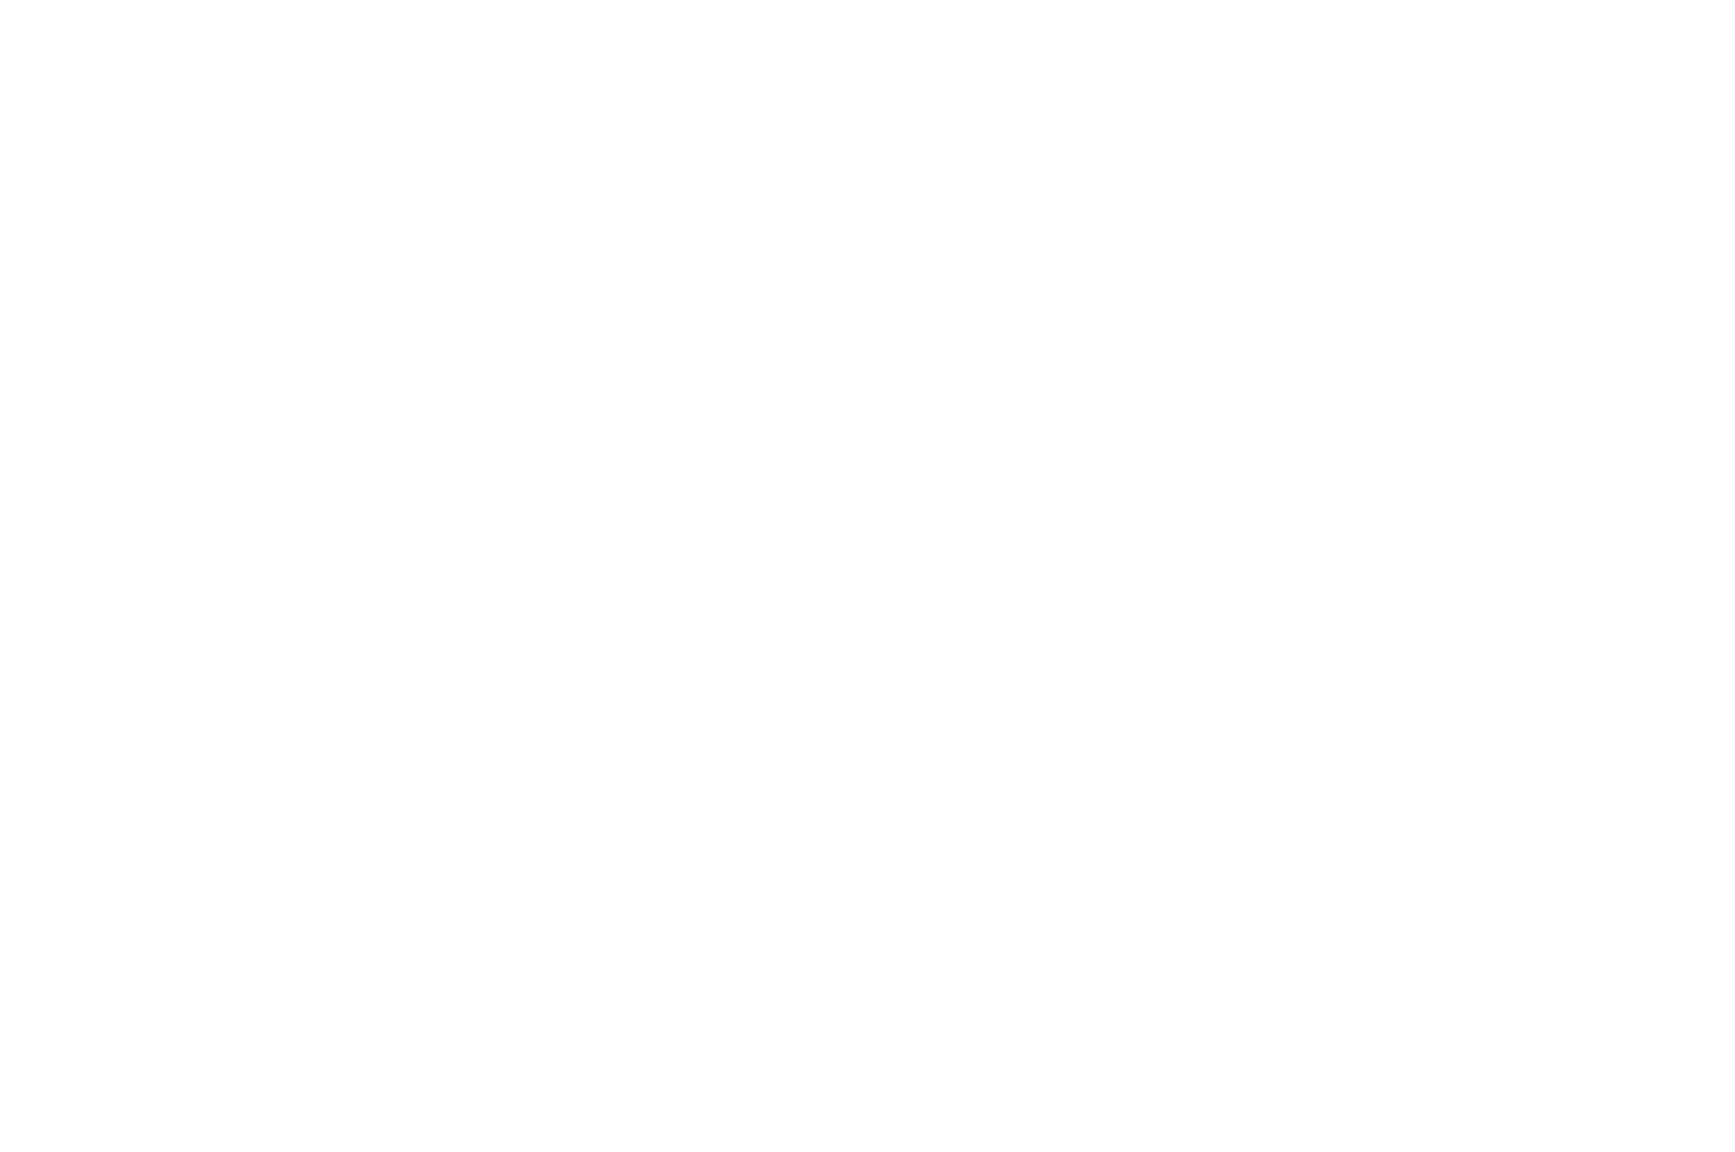 OFFICIAL-SELECTION-OGA-Visual-Art-Exhibitions-2019